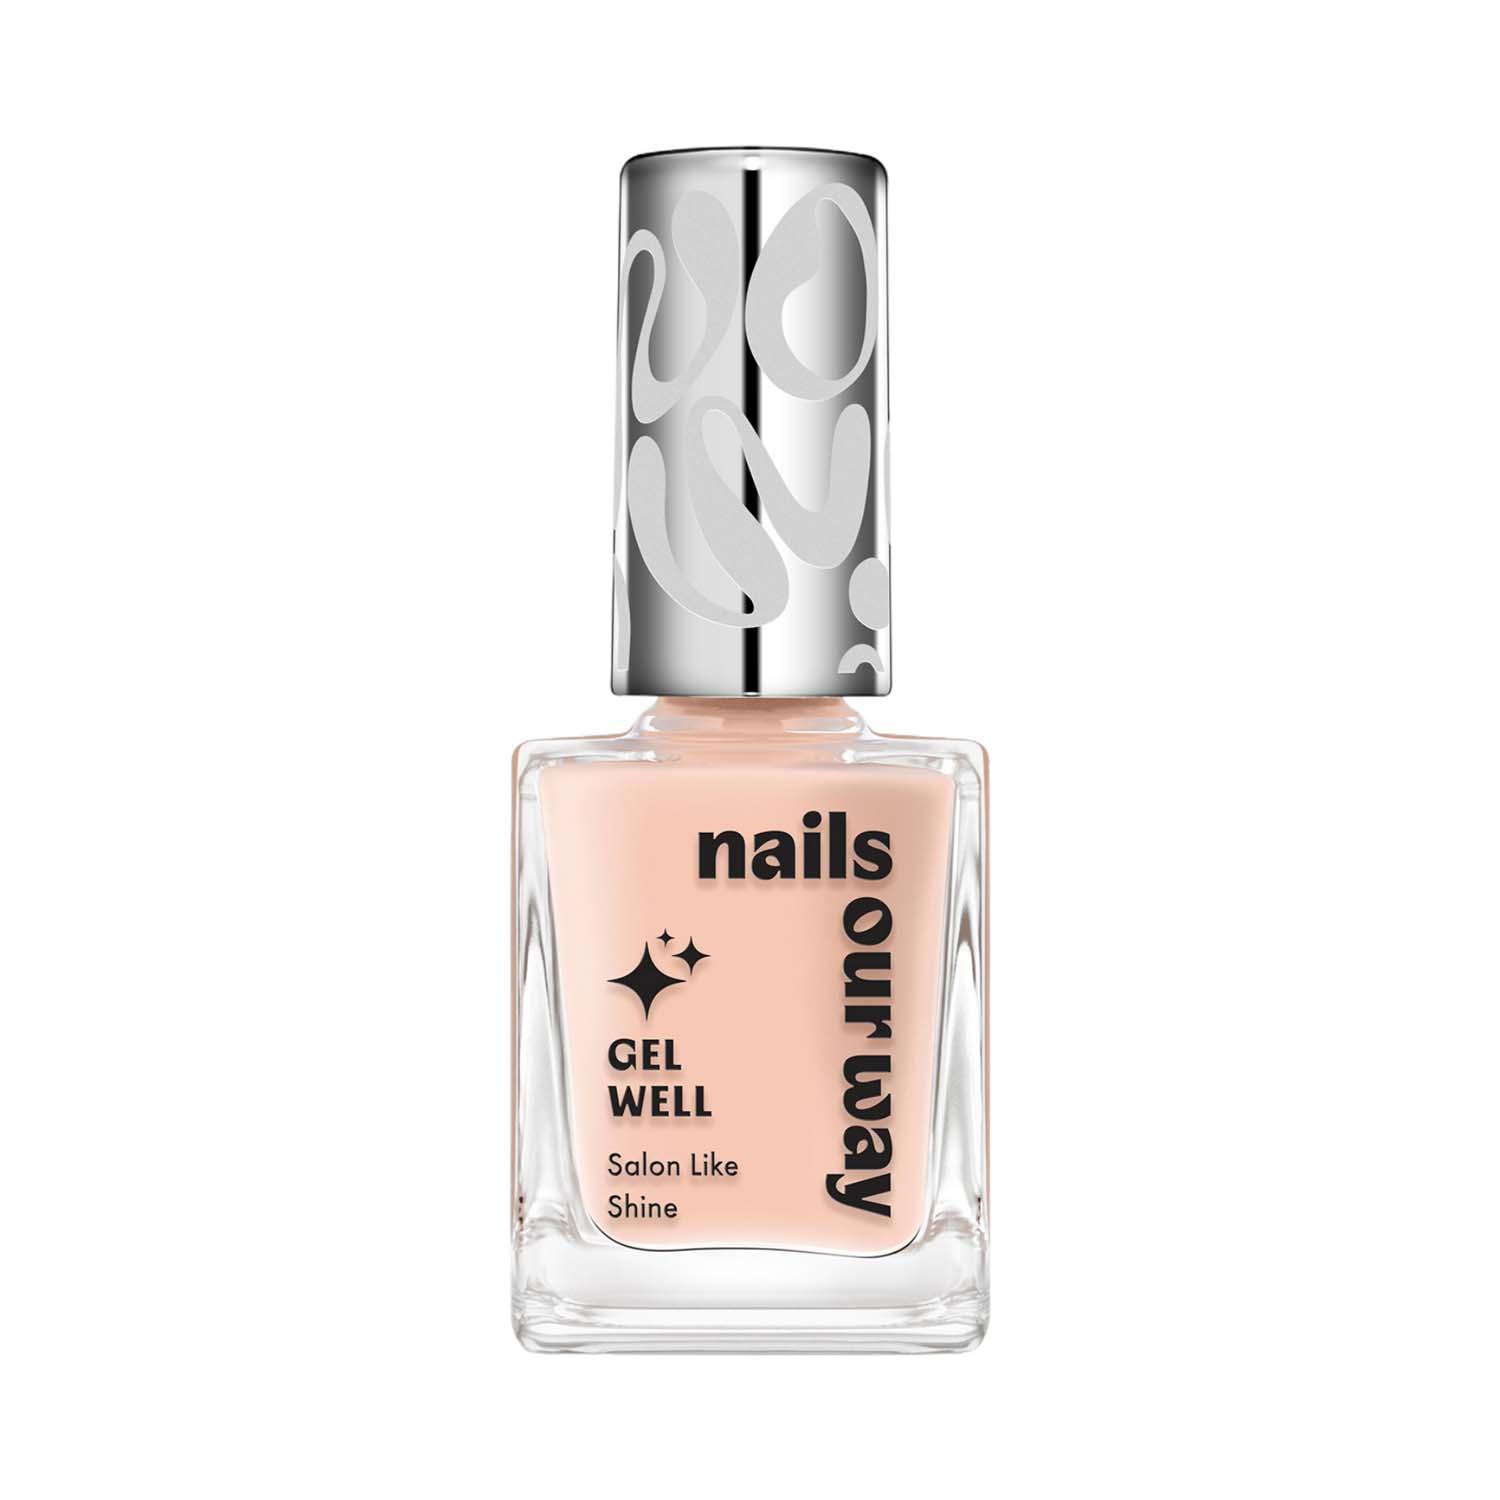 Nails Our Way | Nails Our Way Gel Well Nail Enamel - 501 Blissful (10 ml)